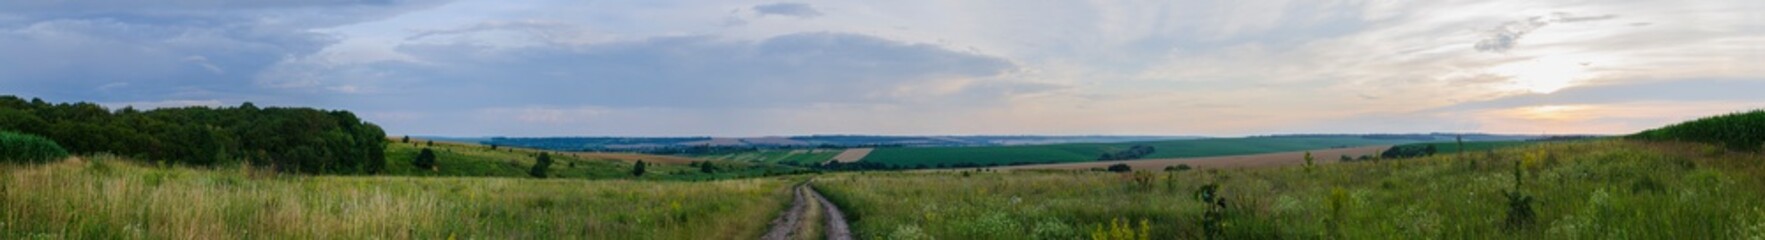 field and road - large horizontal panorama landscape